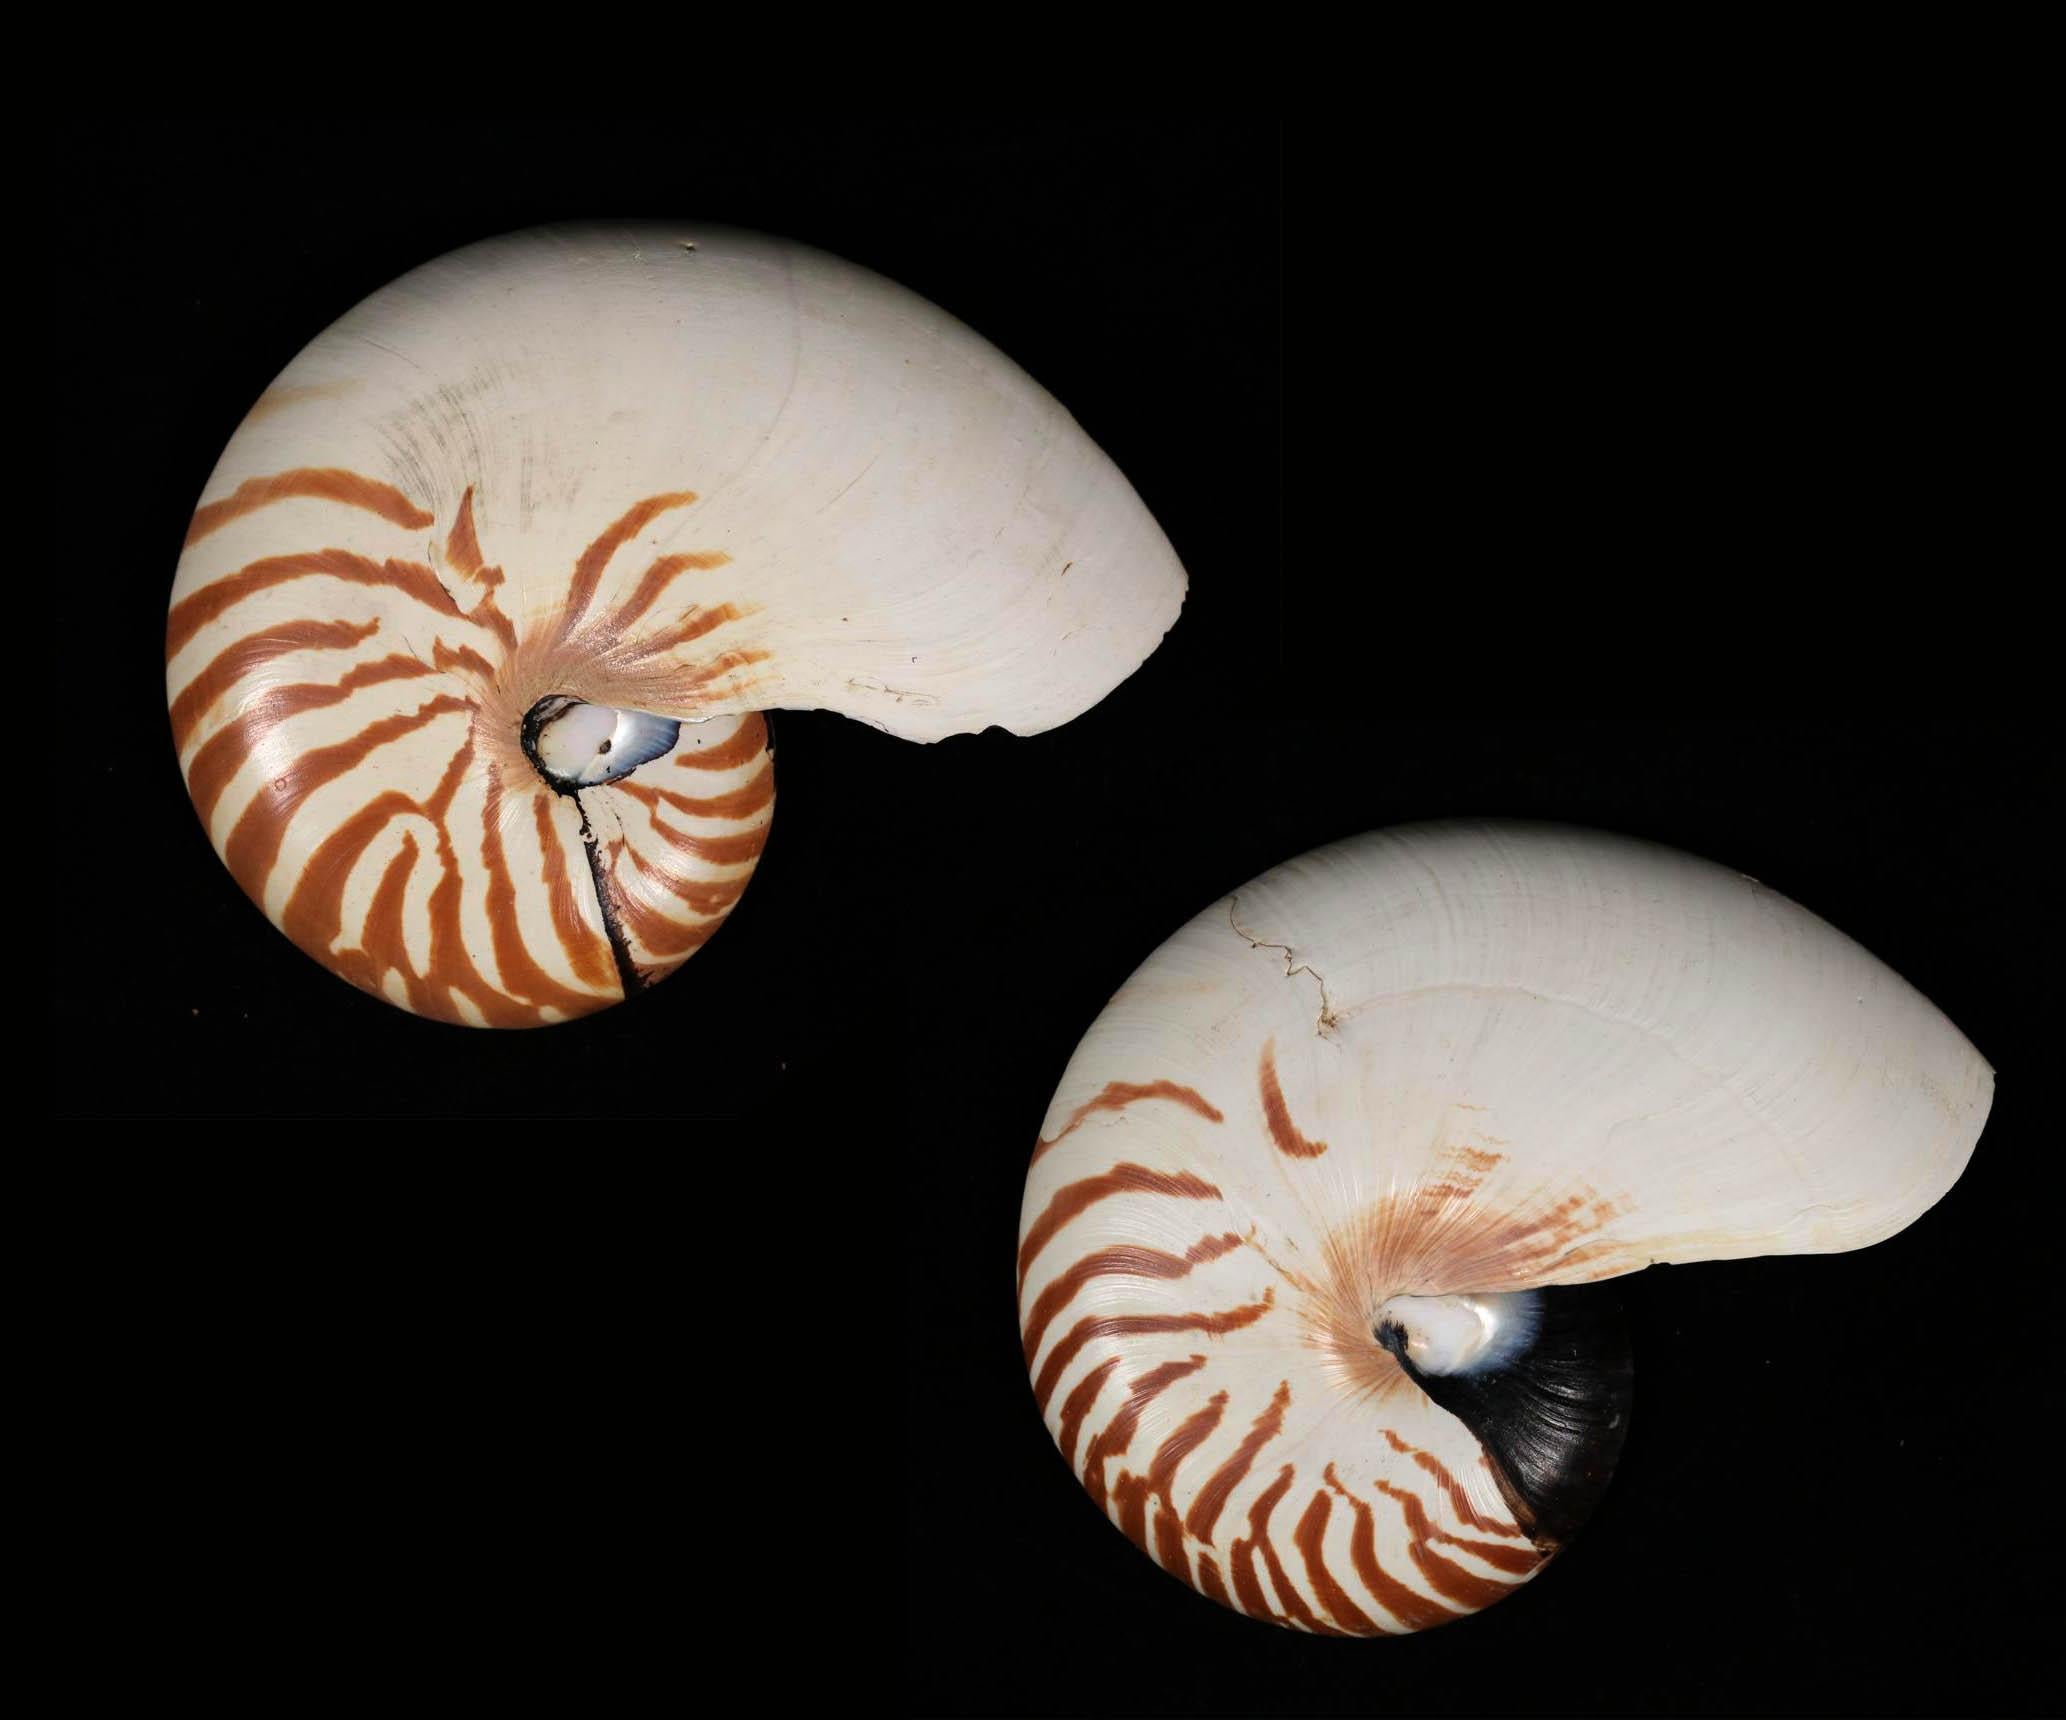 Pair of Natural Striped Chambered Nautilus Half Shells

Nautilus Pompulus
Philippines; harvested in the 20th century

Approximate size: 7 (w) x 5.5 (h) x 2.75 (d) in.

Nautilus shells have long been a staple of wonder for lovers of shells and as